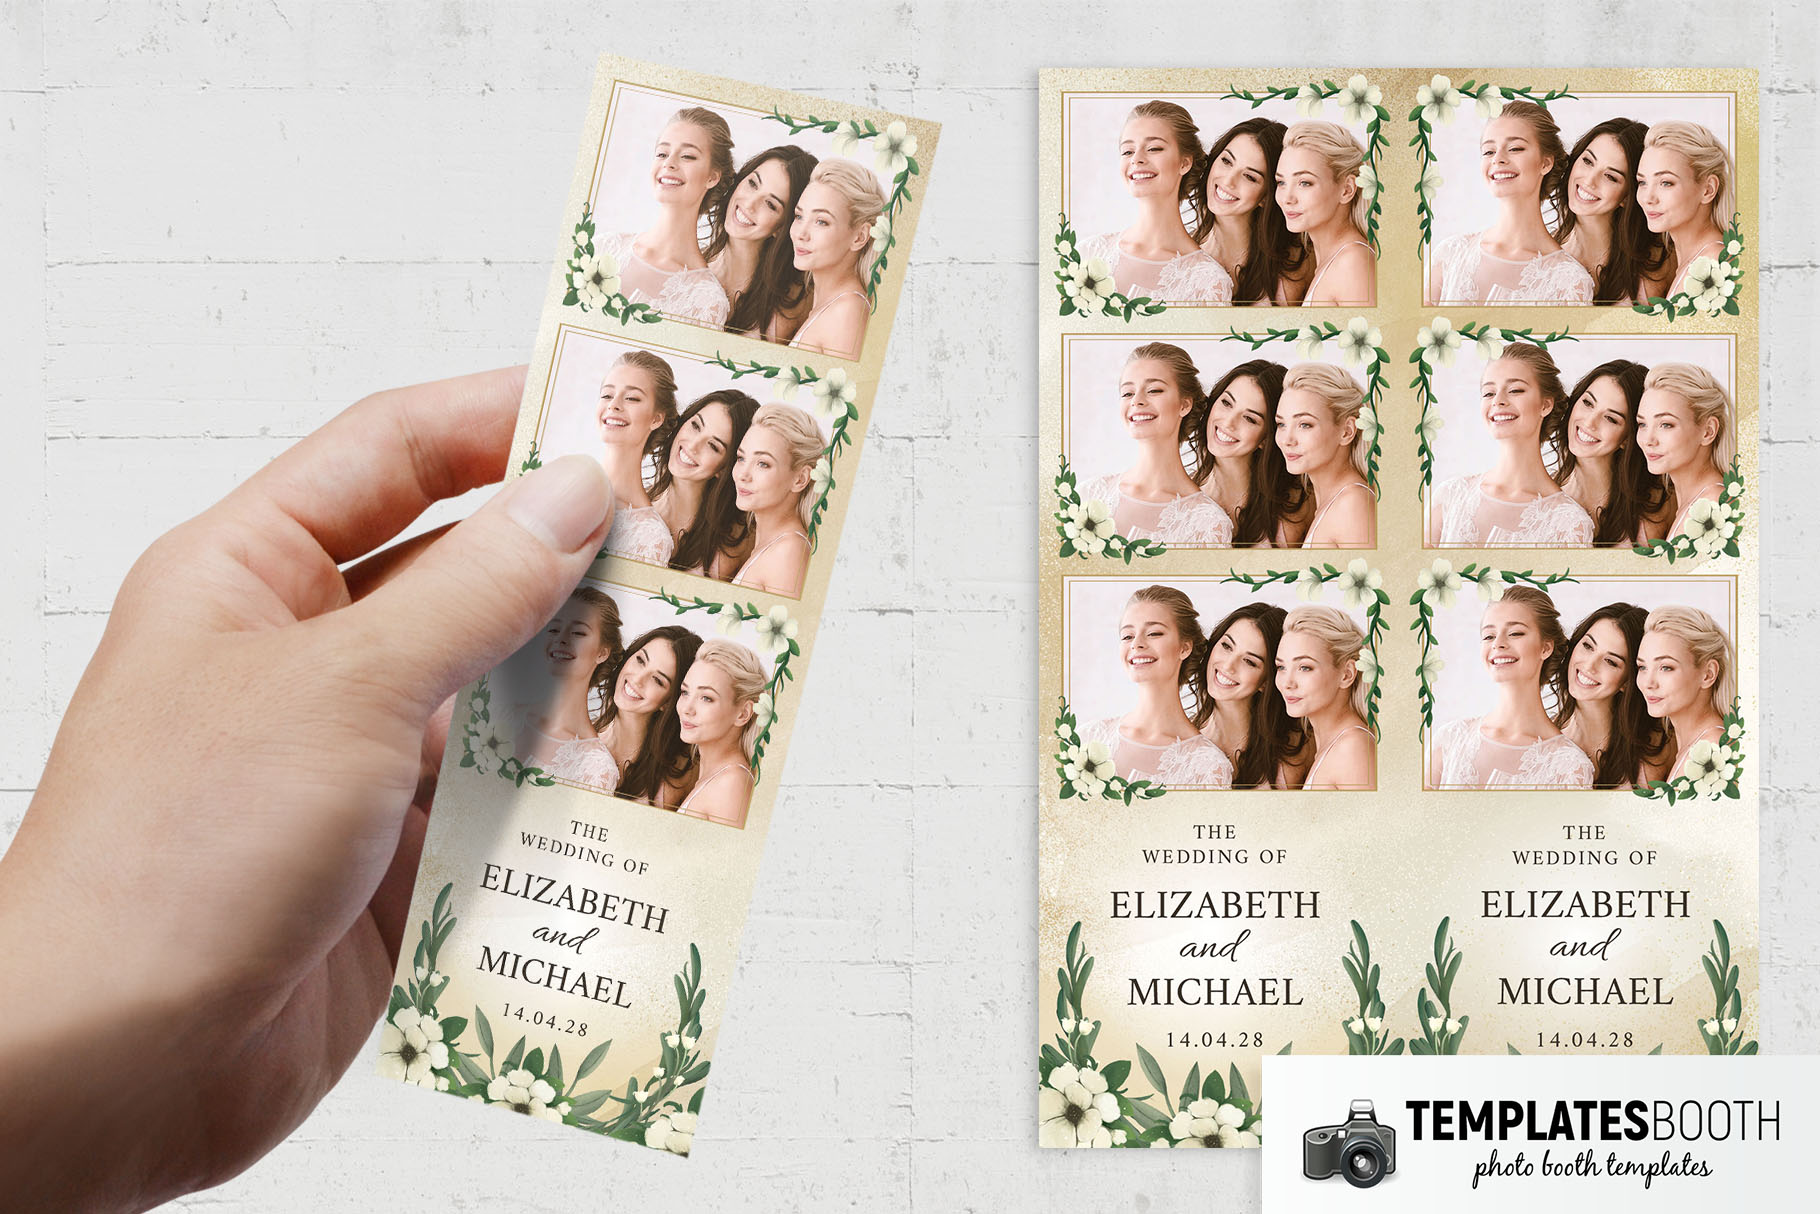 Rustic Wedding Photo Booth Template 